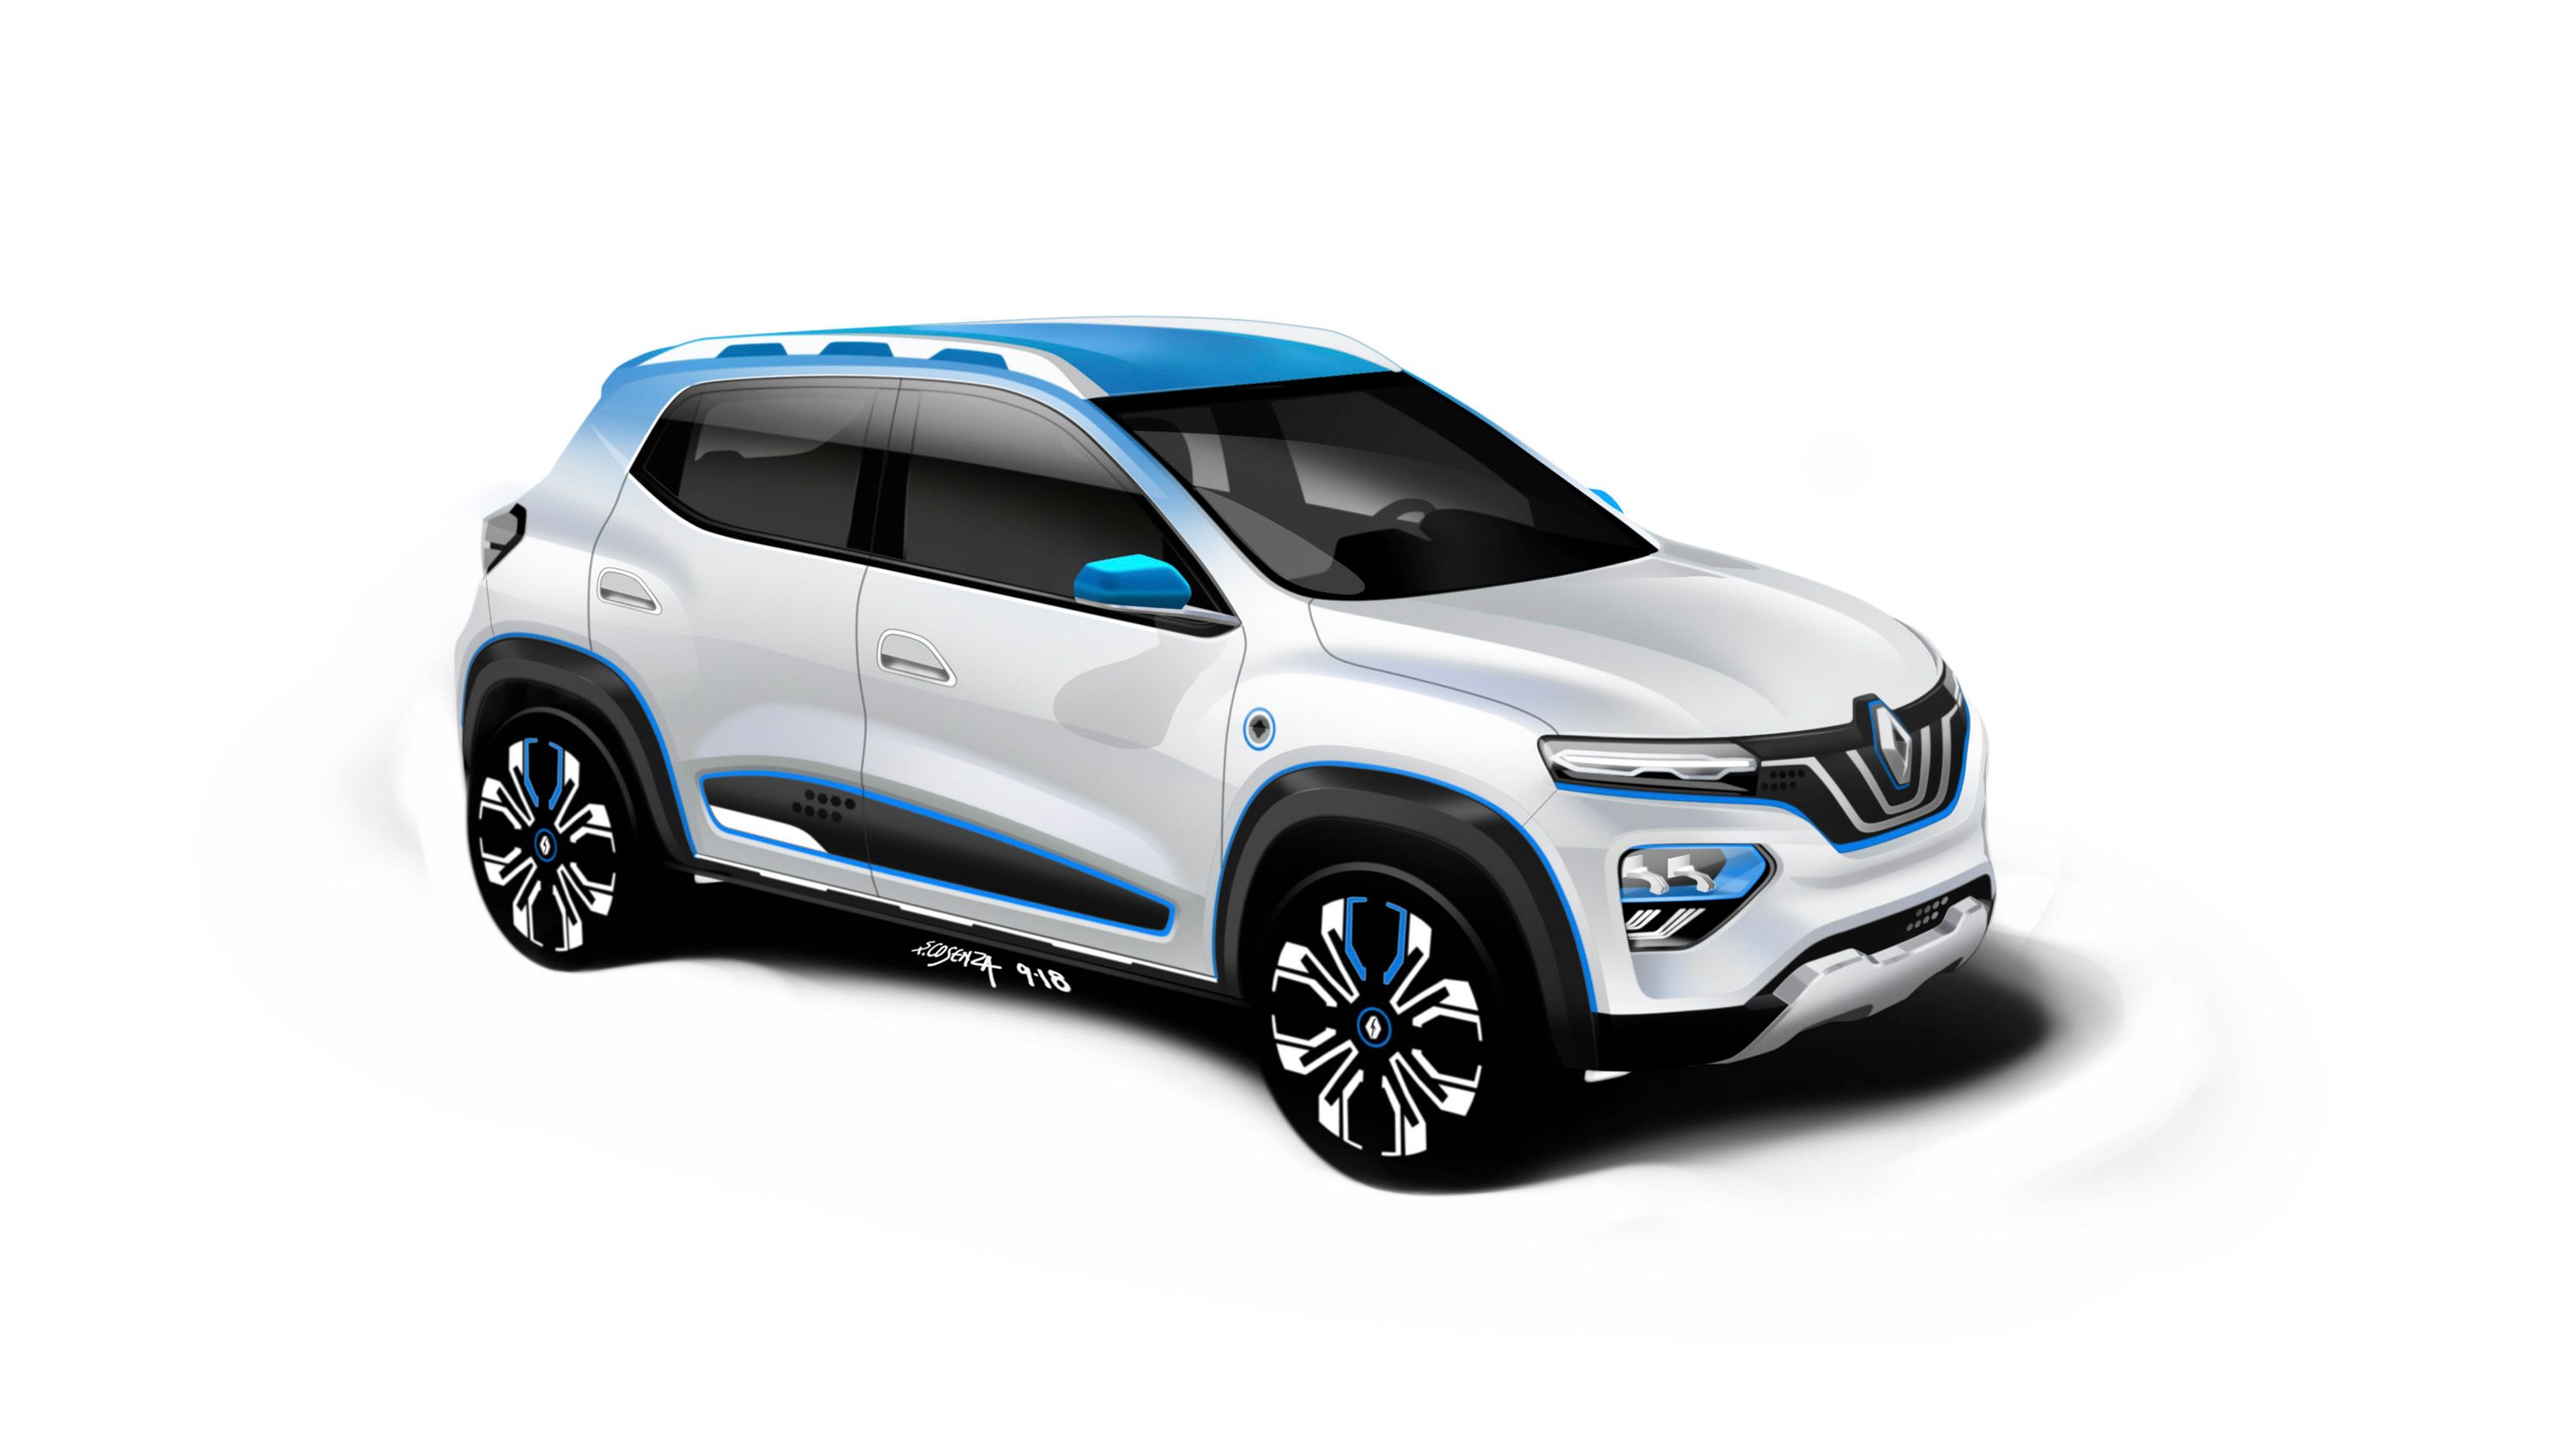 2018 Renault Shows Off a Baby Electric SUV that Goes by the Name K-ZE and Displays Some Future Technology